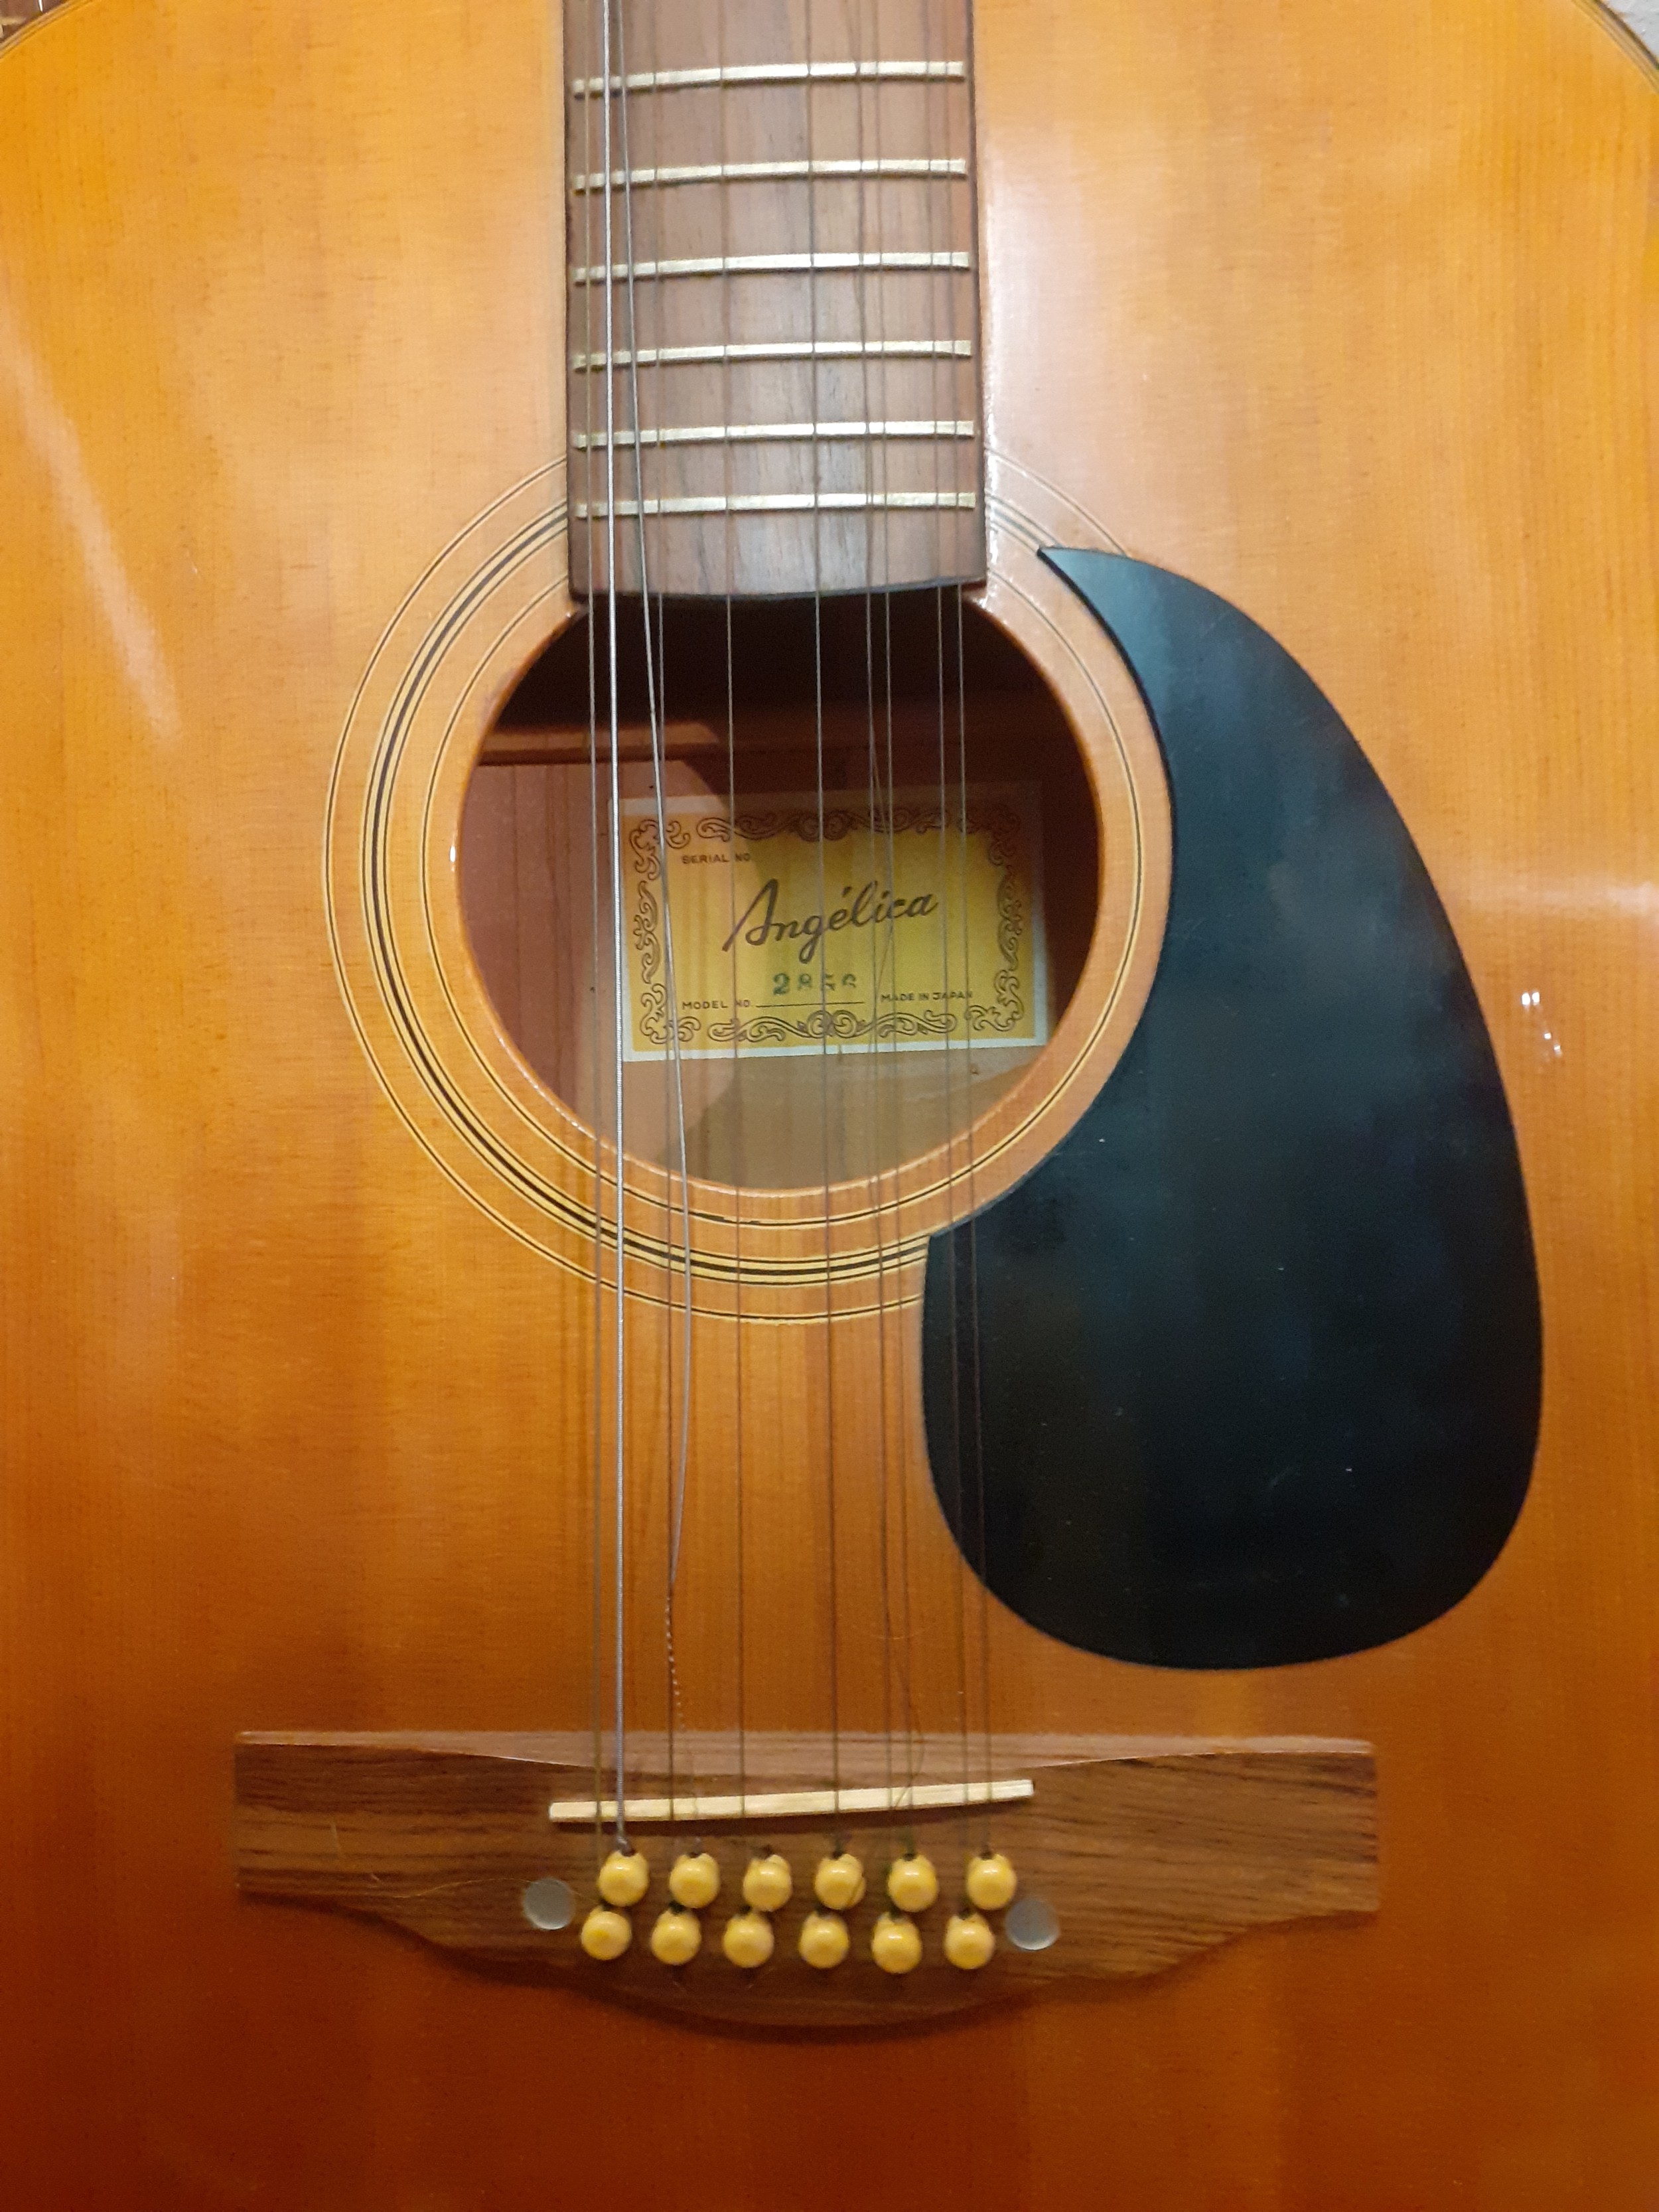 Two guitars comprising a vintage 12-string Angelica acoustic guitar, model 2856, made in Japan - Image 2 of 9